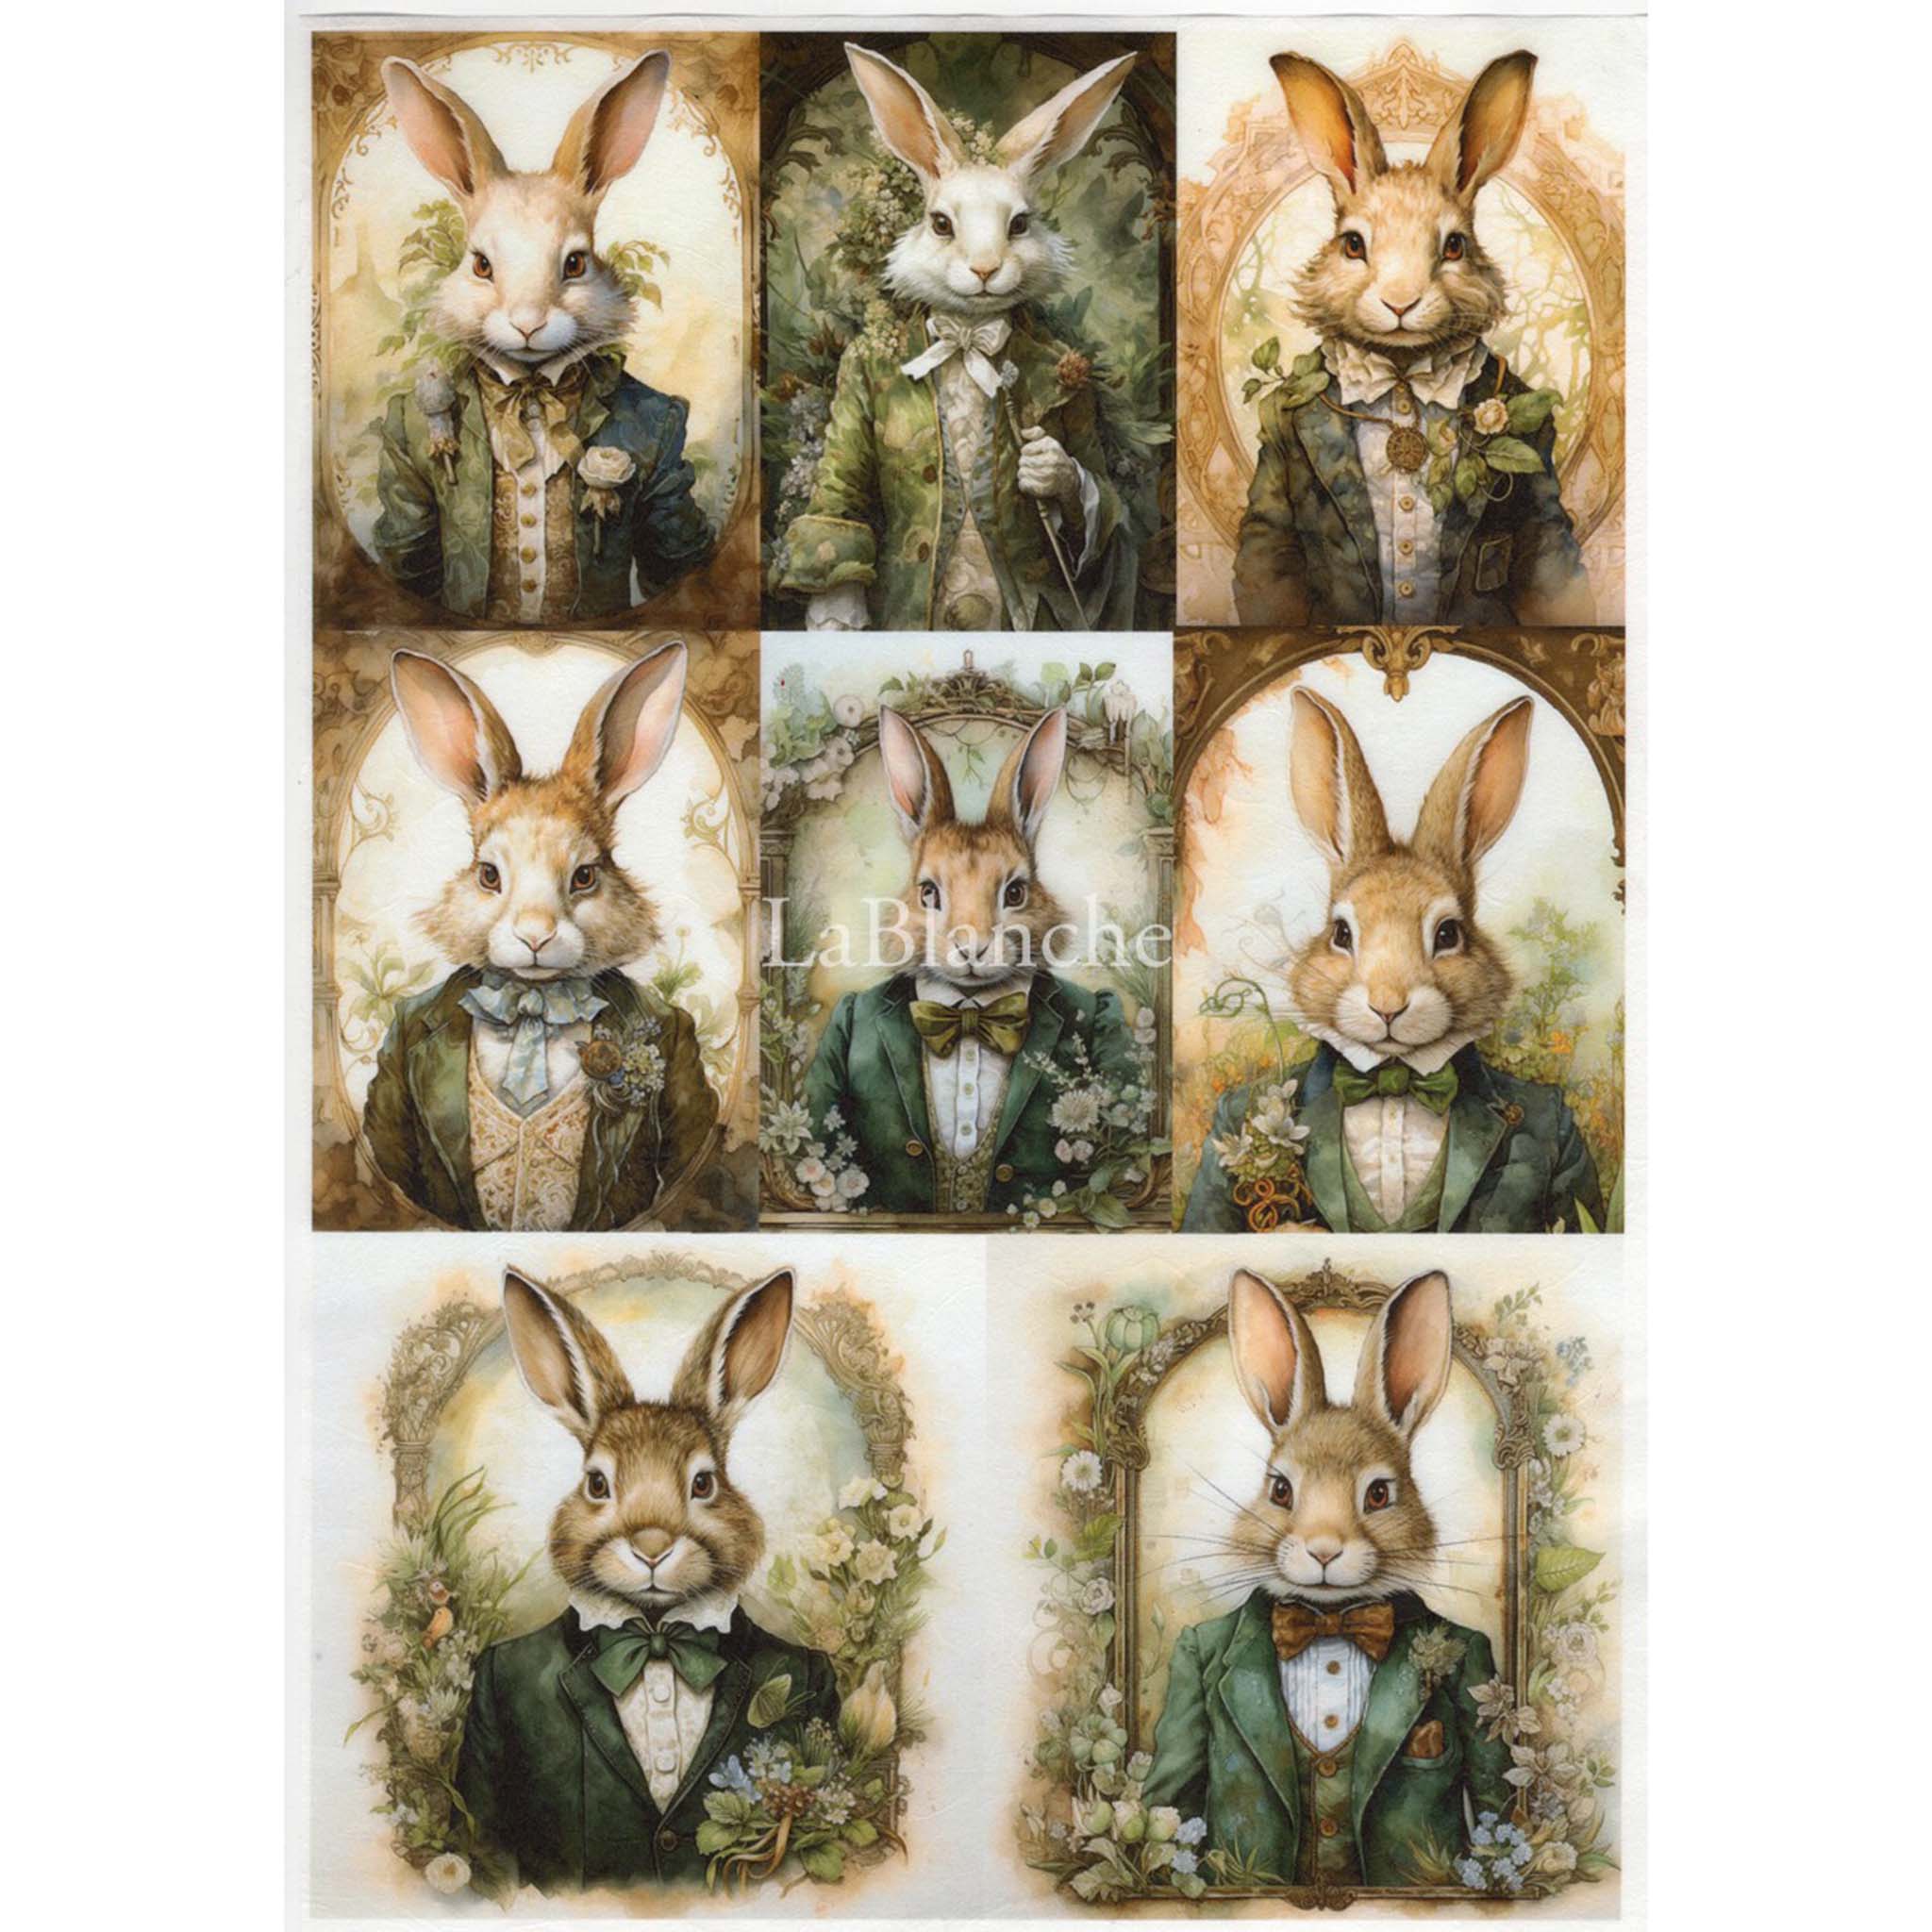 A4 Plus rice paper design that features eight designs of dapper bunnies in suits. White borders are on the sides.